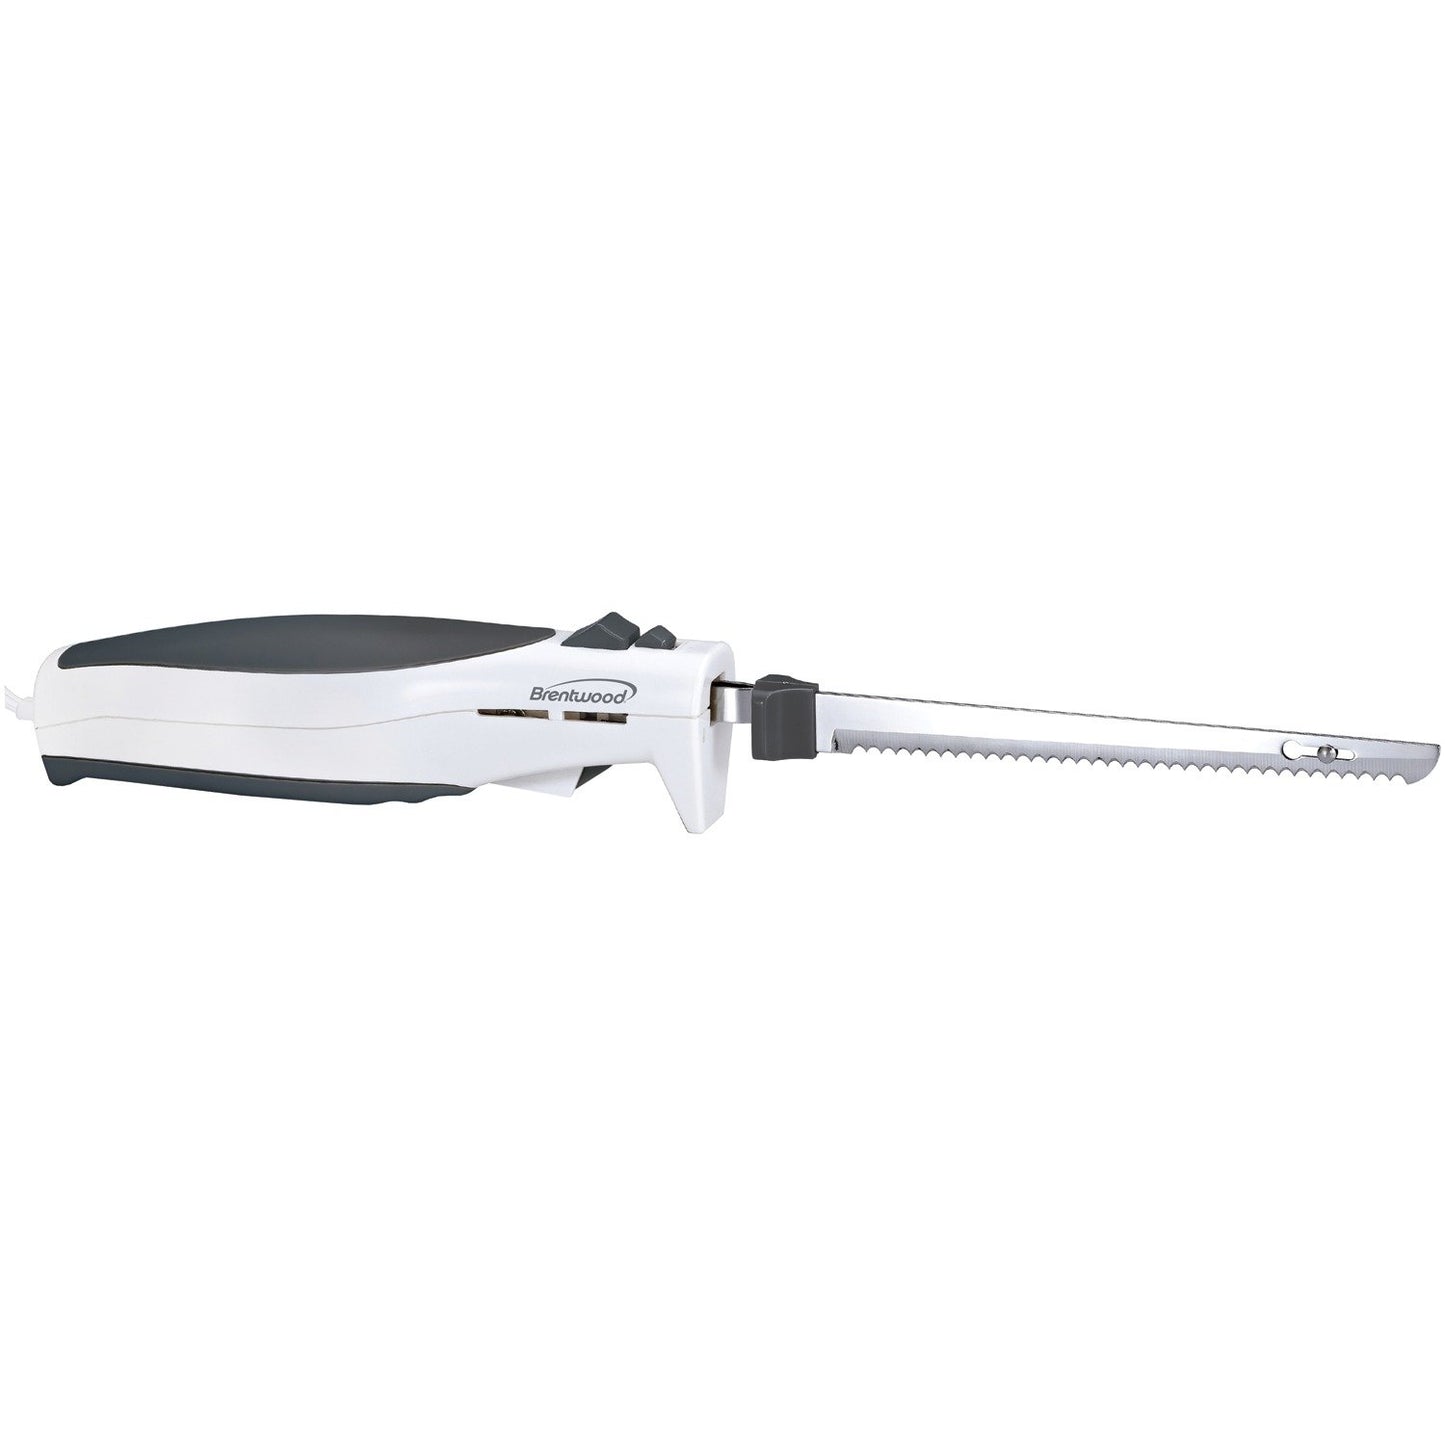 Brentwood Appliances TS-1010 7" Electric Carving Knife